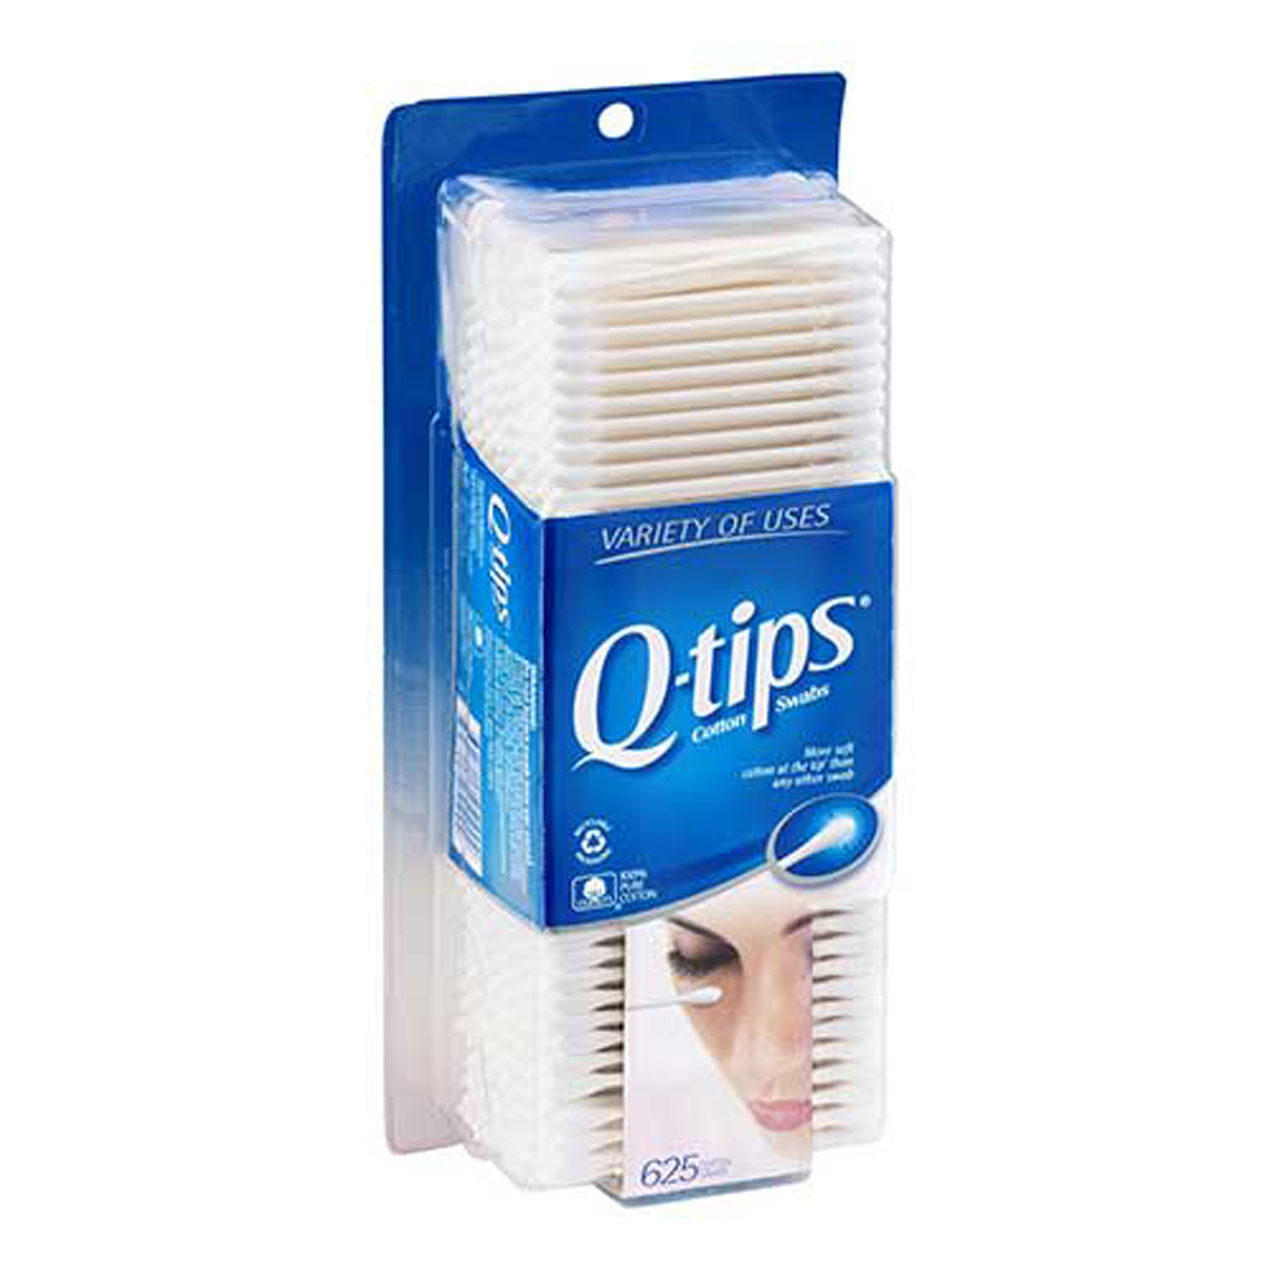 What material is the Q-Tips Safety Swabs, Family Size, 625 ct made of?